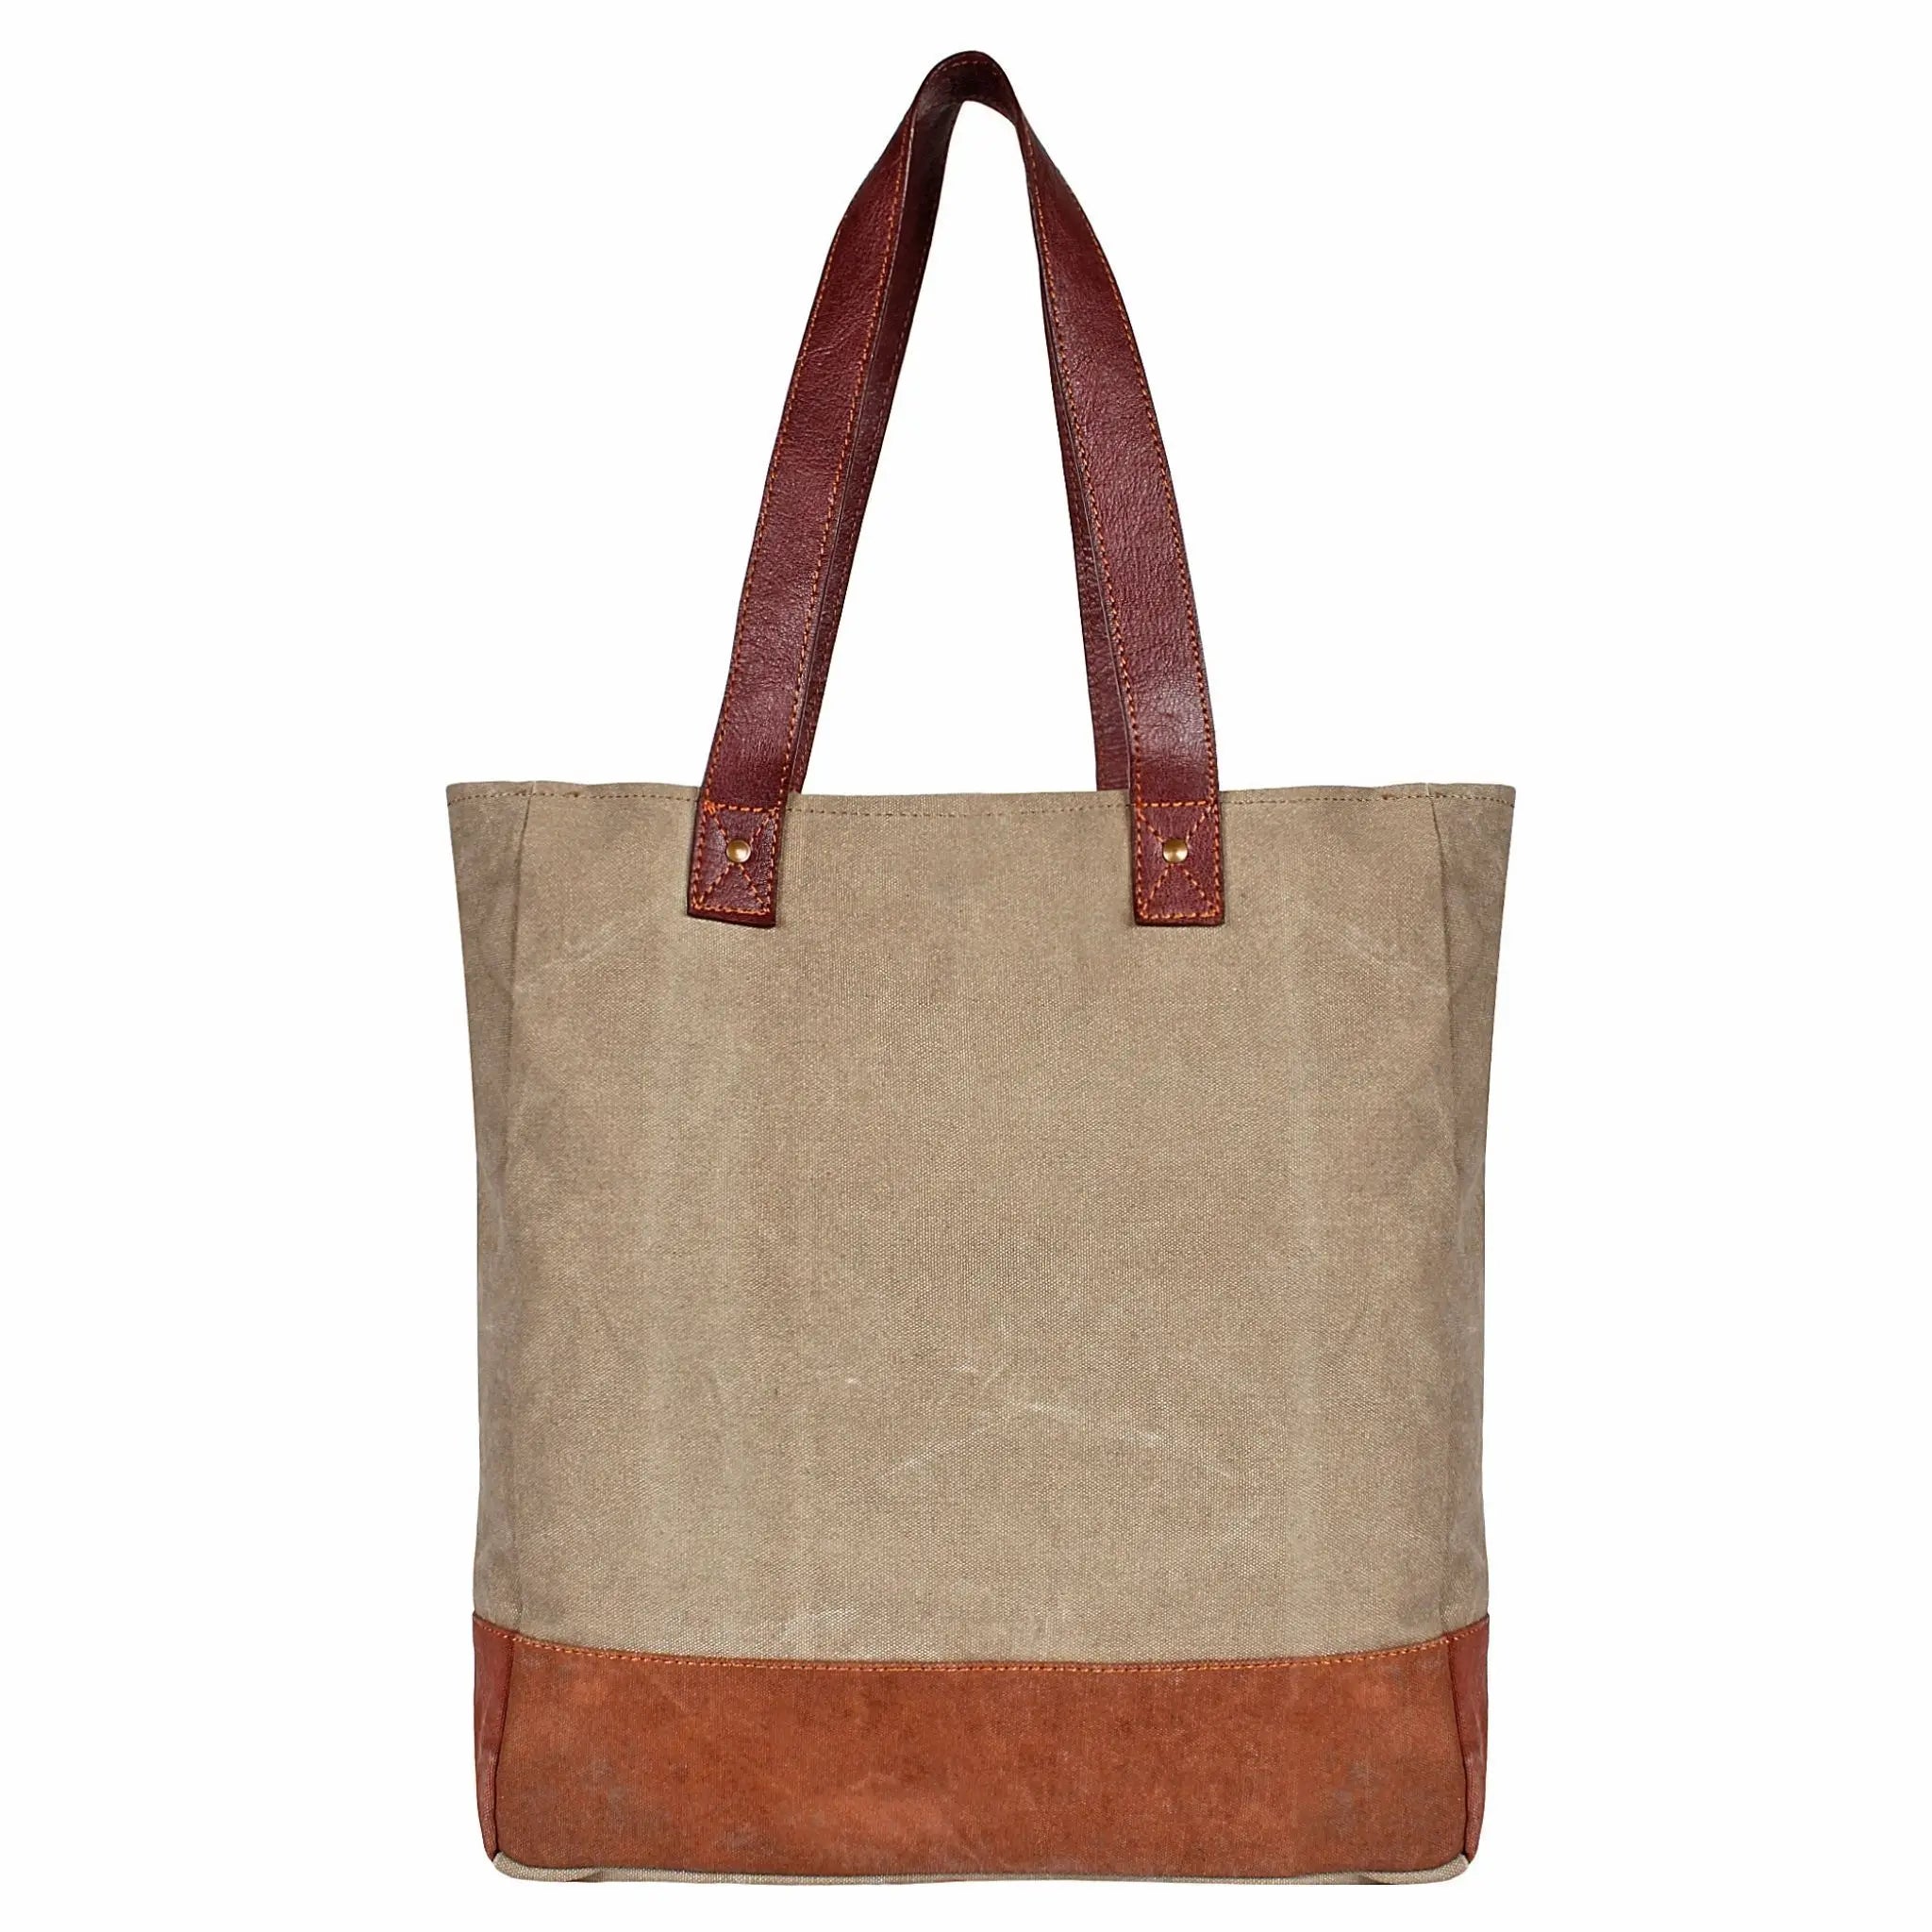 All About the Journey - Tote Bag